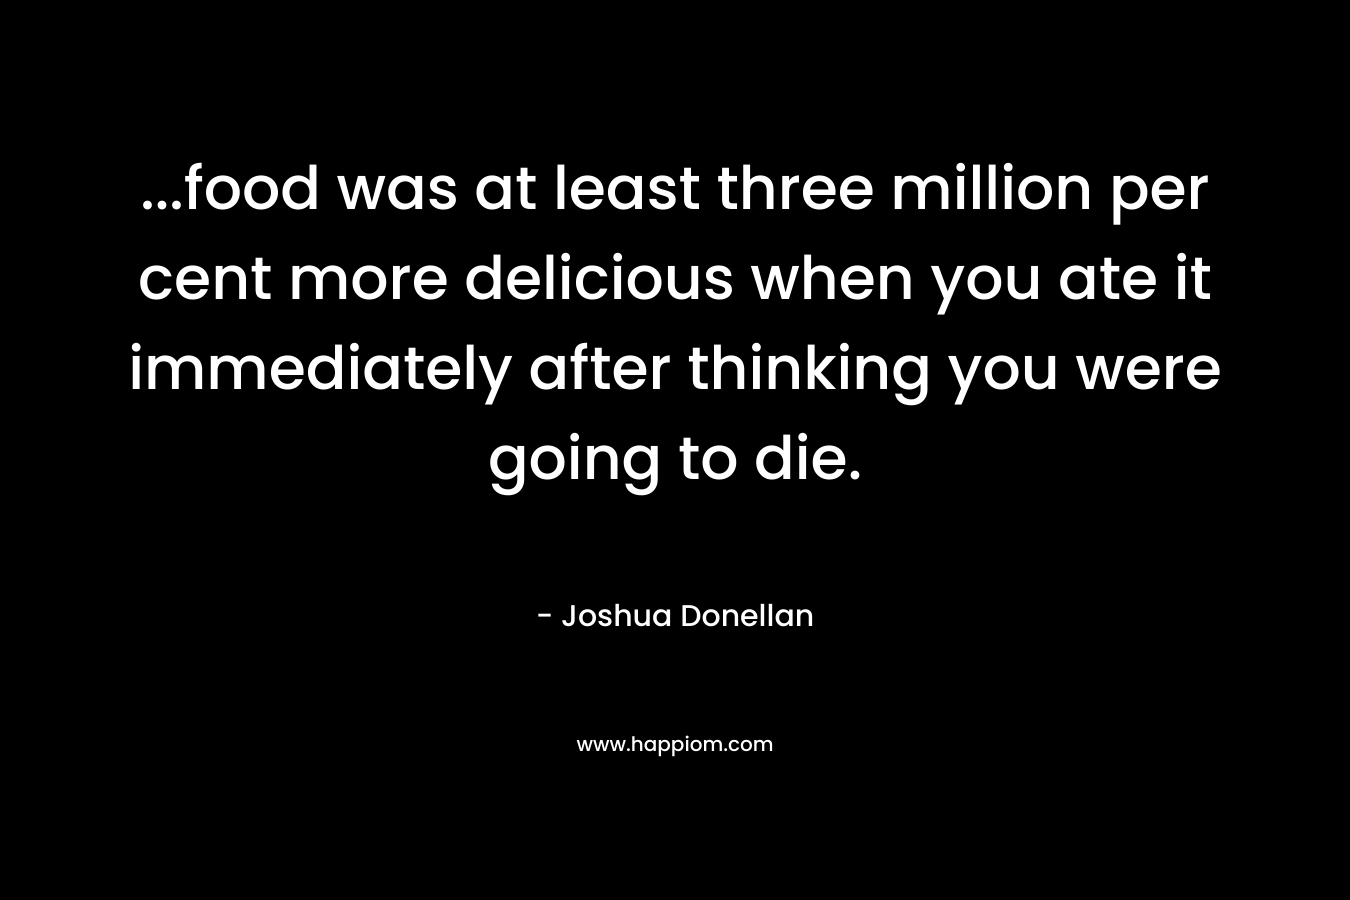 …food was at least three million per cent more delicious when you ate it immediately after thinking you were going to die. – Joshua Donellan